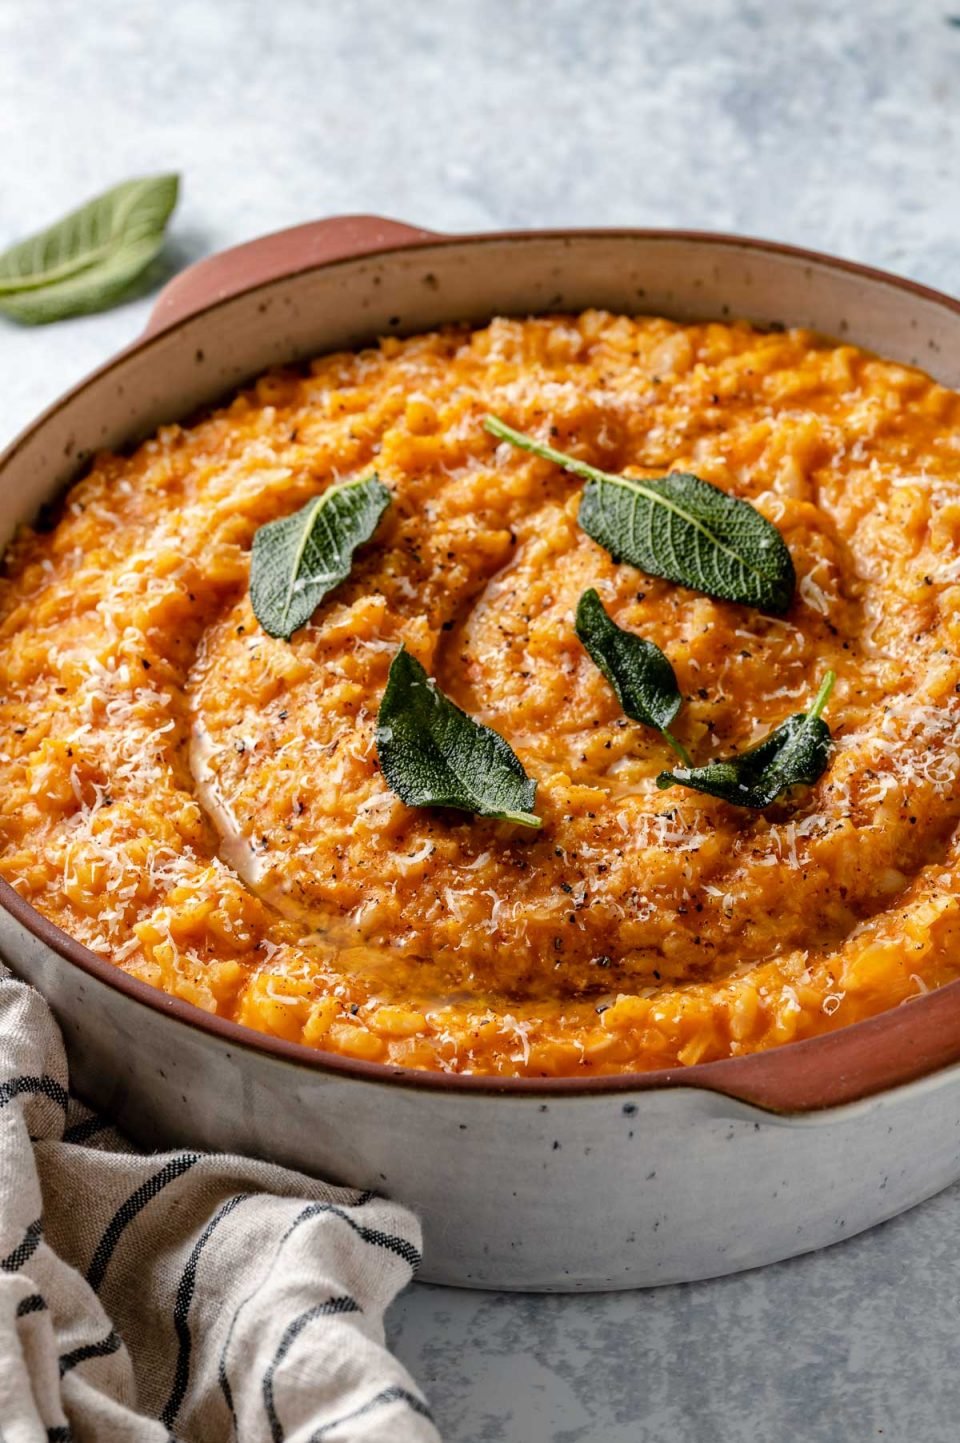 Side angle of creamy pumpkin risotto shown in a large terra cotta serving dish. The risotto is topped with crispy fried sage leaves & finely grated parmesan. The dish sits atop a light blue surface, next to a striped linen napkin & some fresh sage leaves.